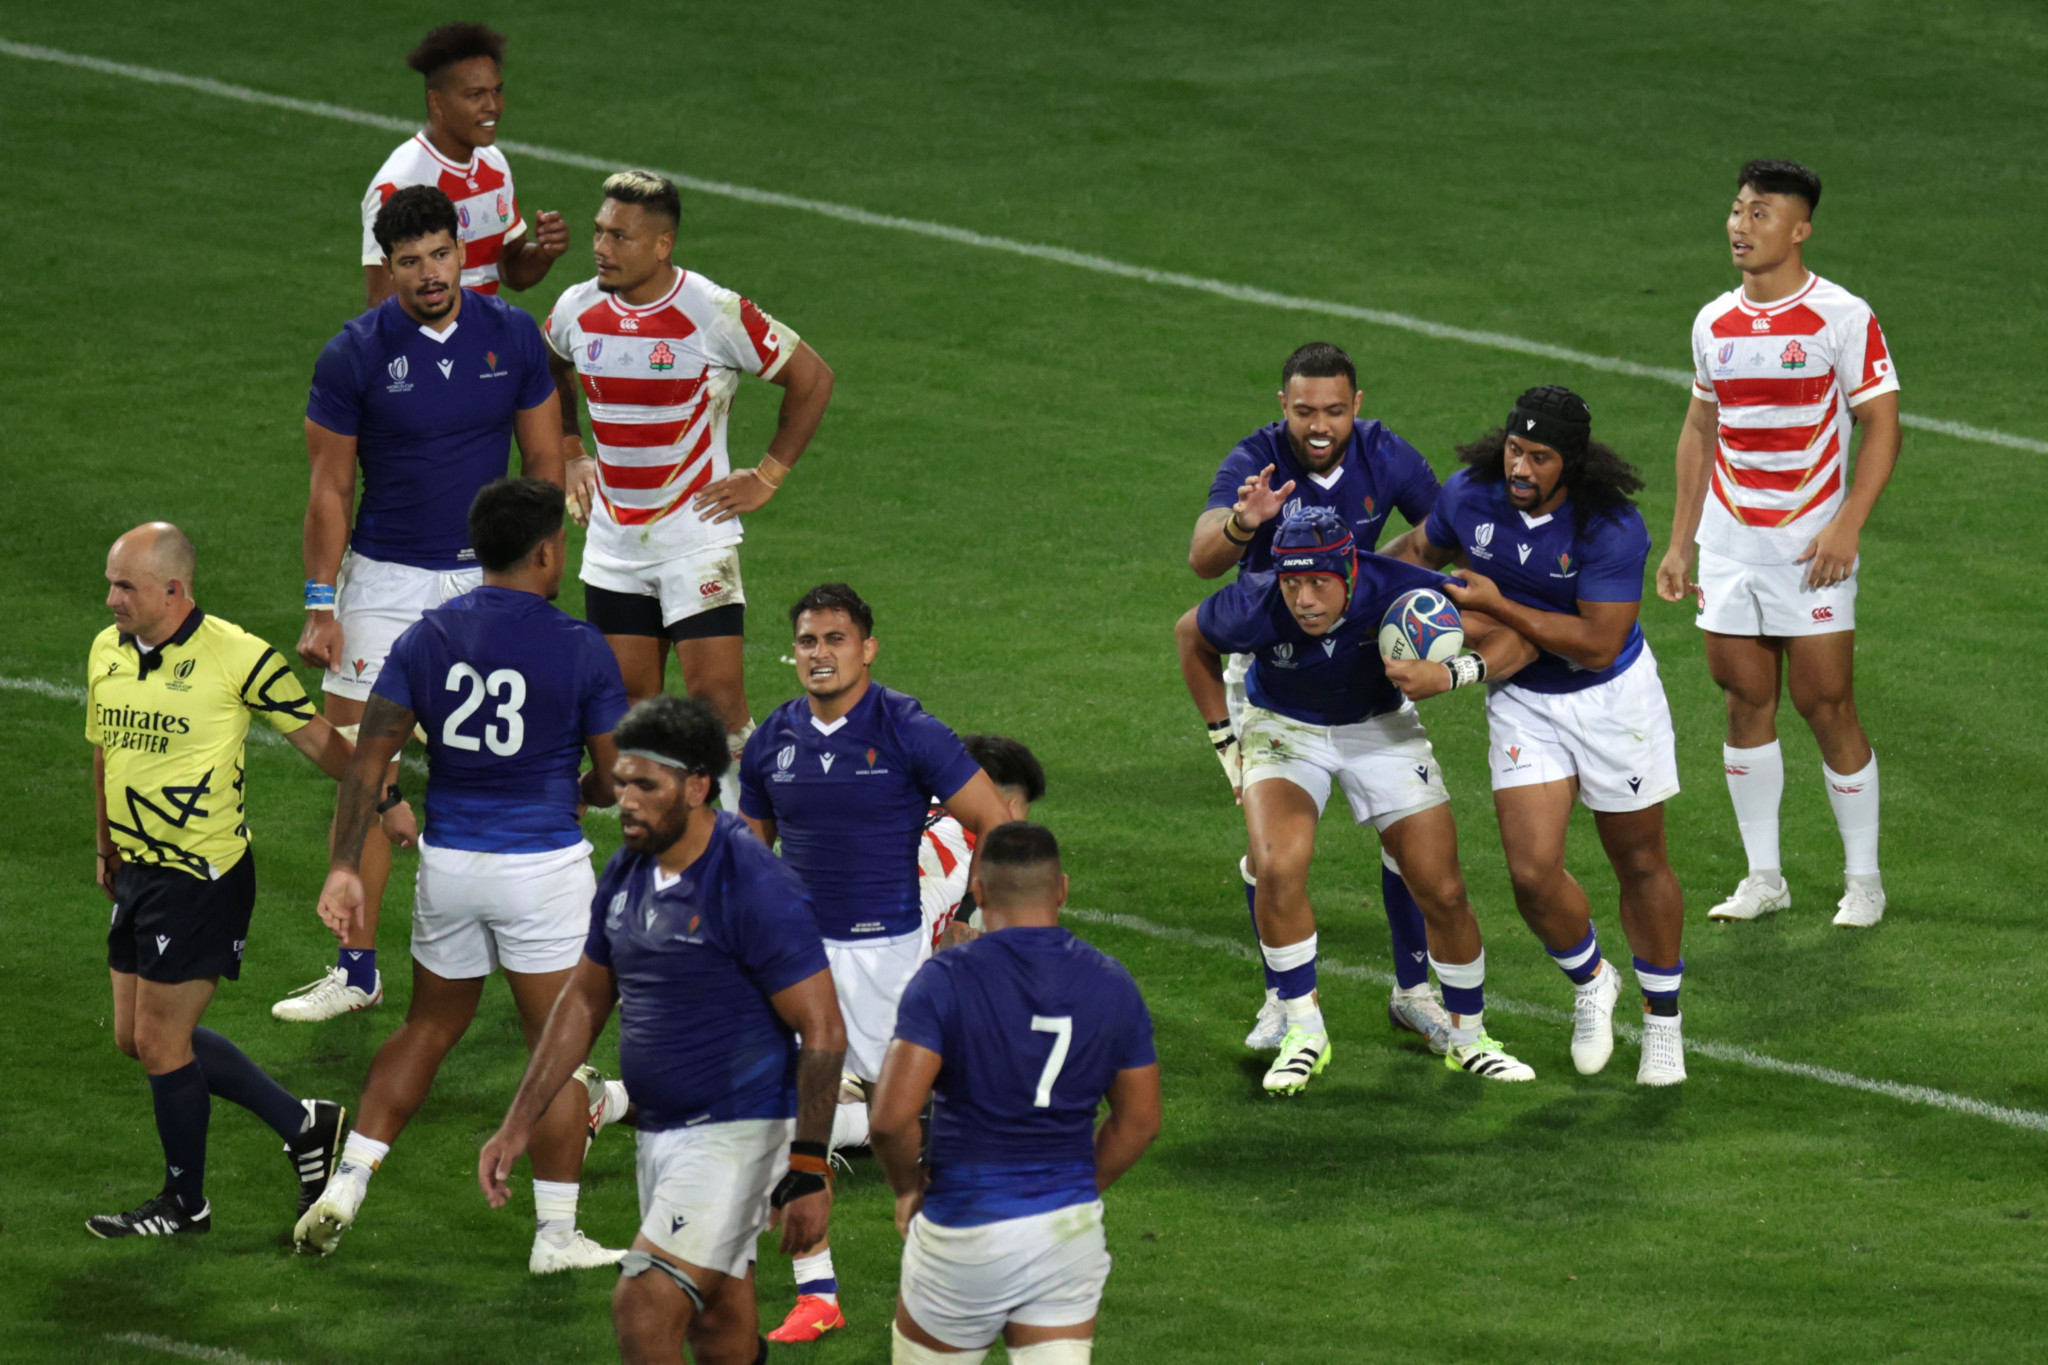 A late try from Christian Leali'ifano for Samoa gave the 14 men hope, but their chances of progressing appear slim with only England to come in Pool D ©Getty Images